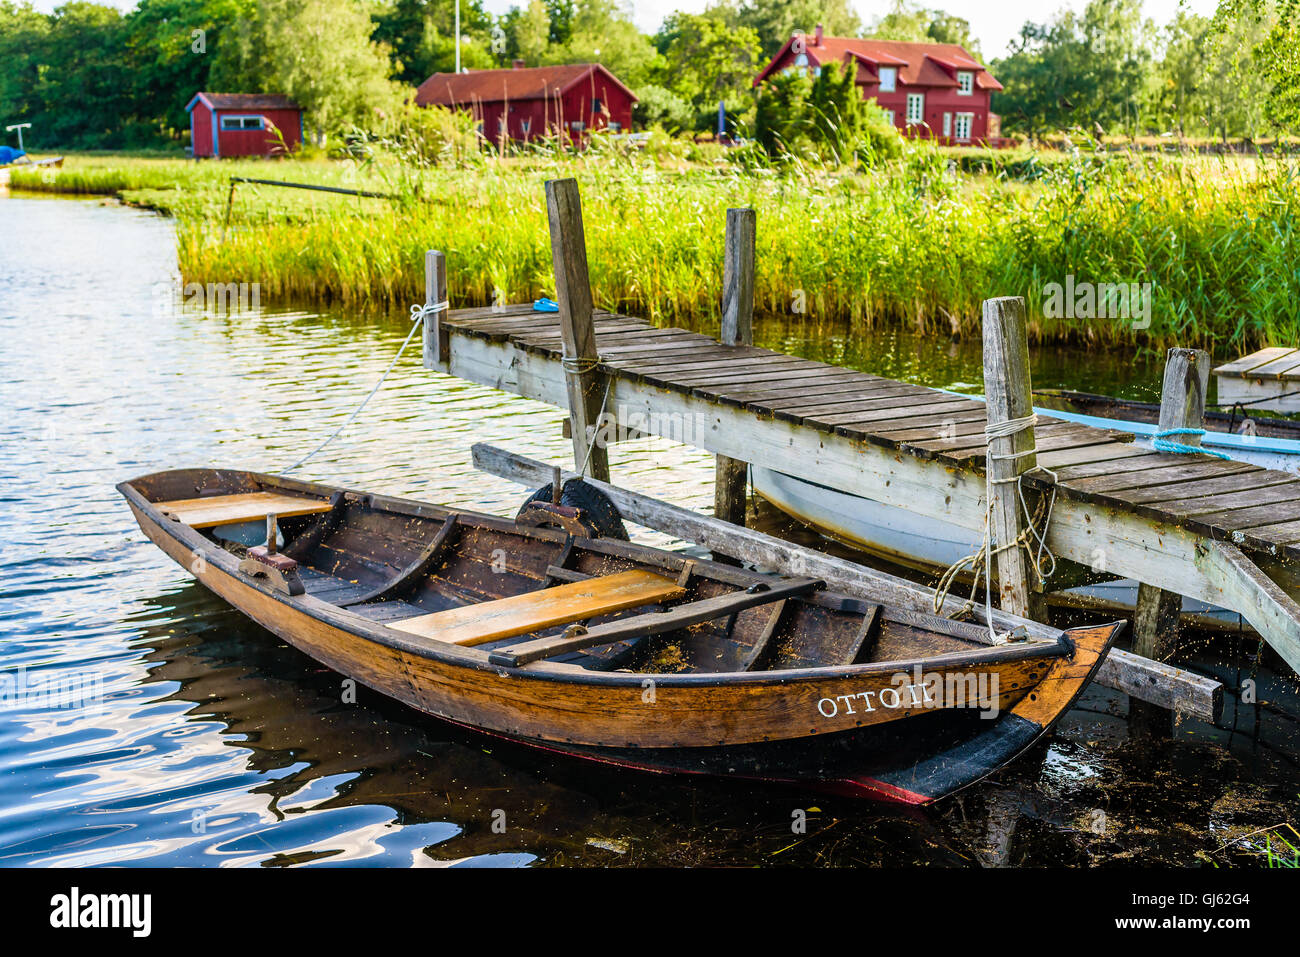 Pataholm, Sweden - August 9, 2016: Traditional wooden skiff named Otto II moored at small pier with red homestead in the backgro Stock Photo